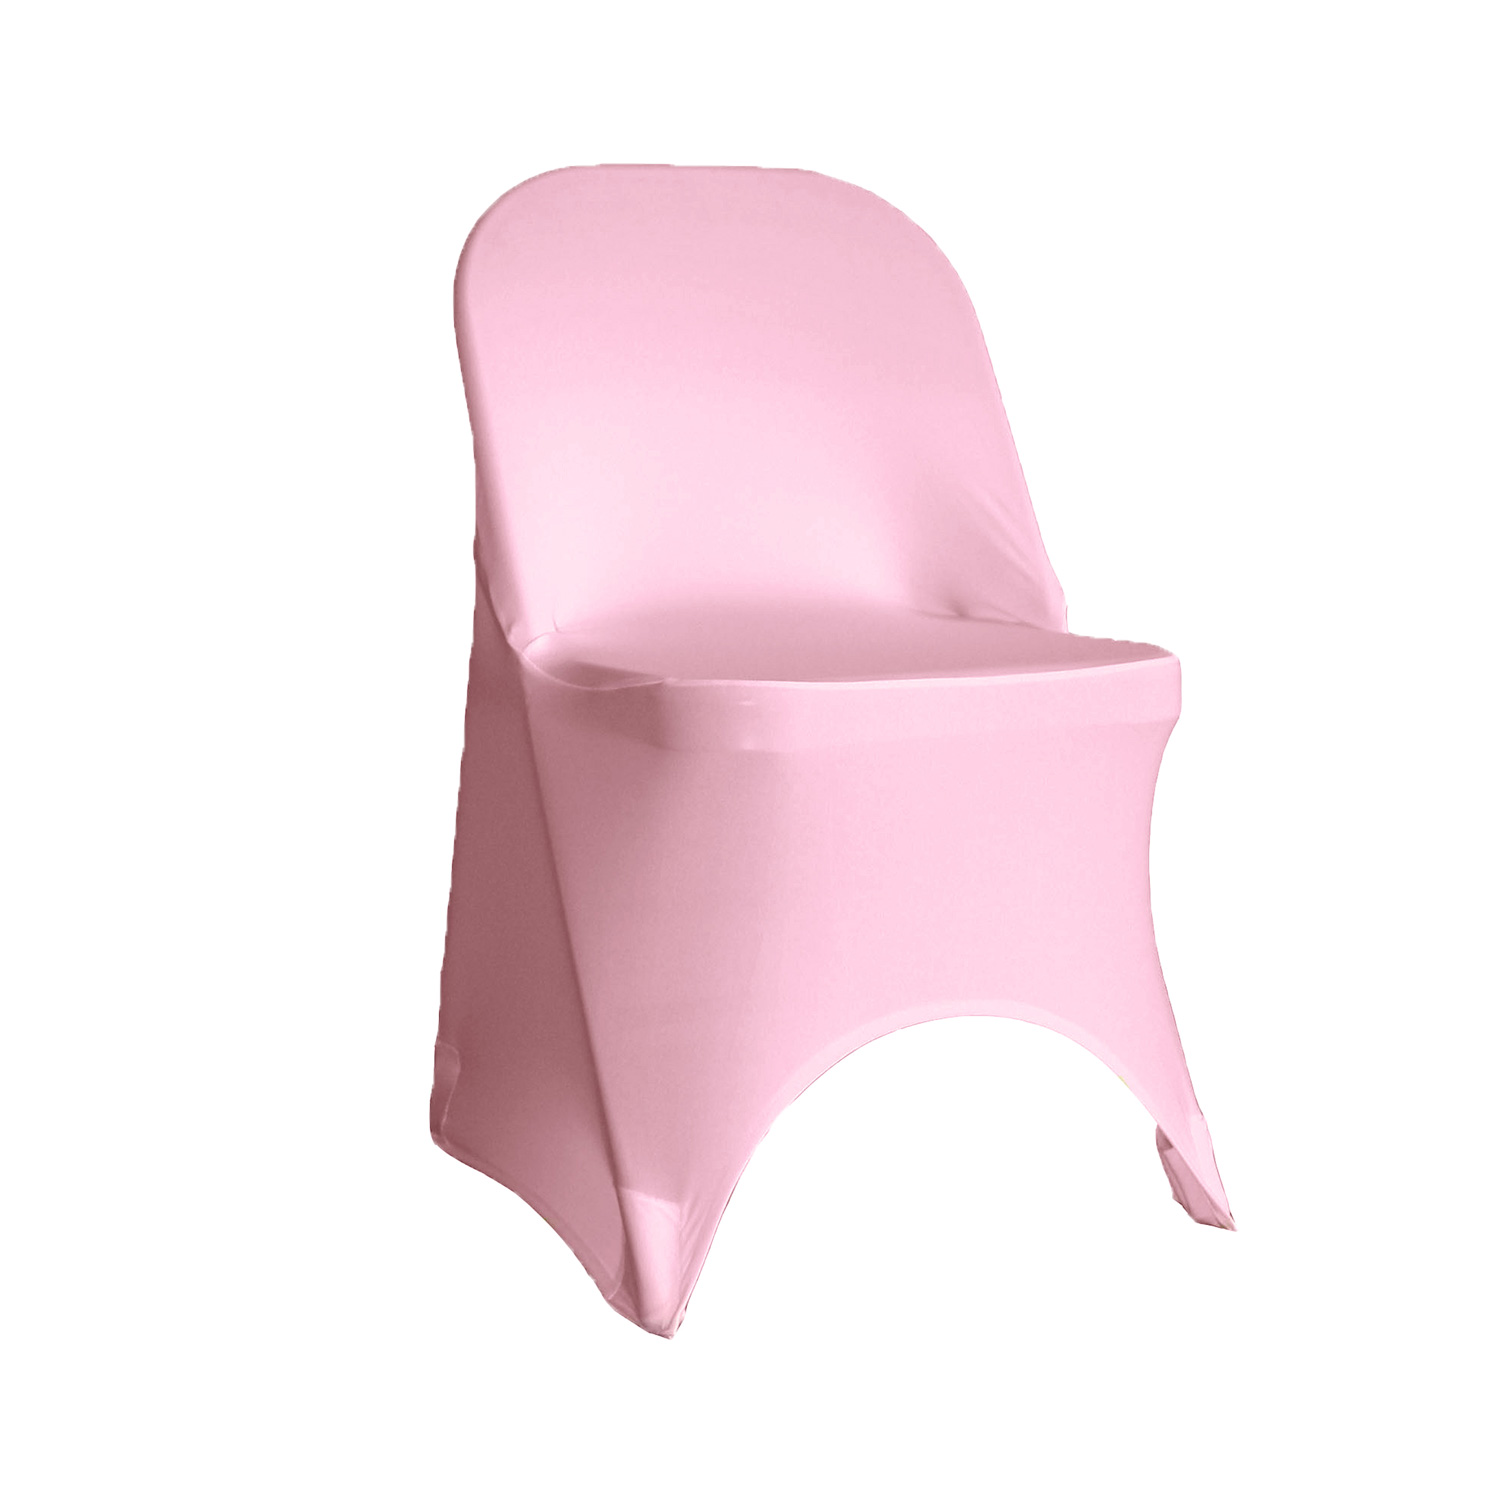 Your Chair Covers - Stretch Spandex Folding Chair Cover Pink for Wedding, Party, Birthday, Patio, etc. - image 1 of 3